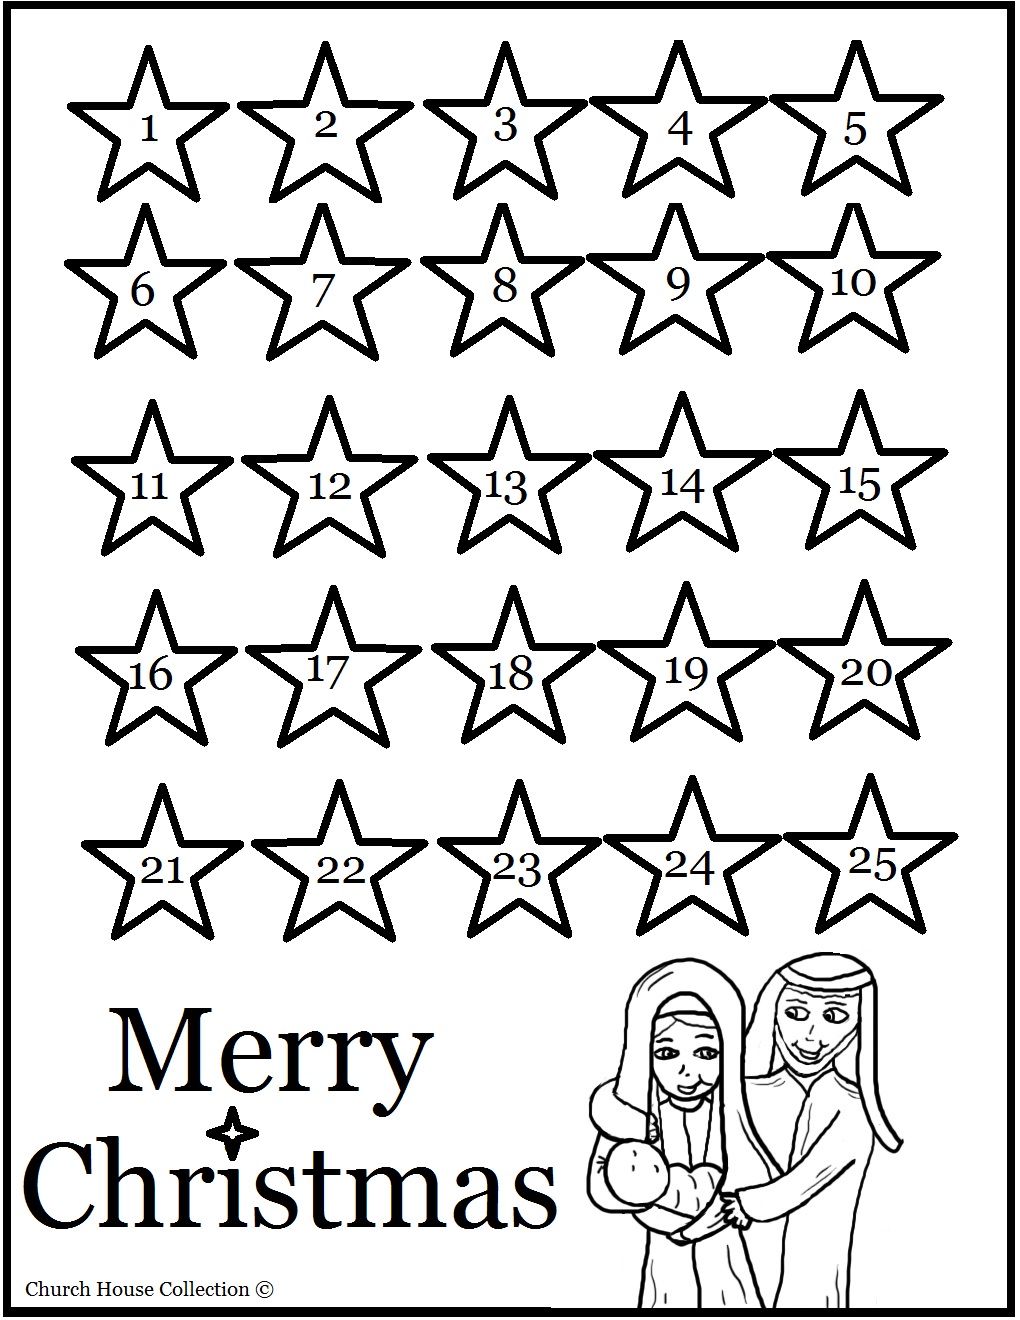 Christmas Advent Calendar Coloring Pages With Stars Free Printable Coloring Pages